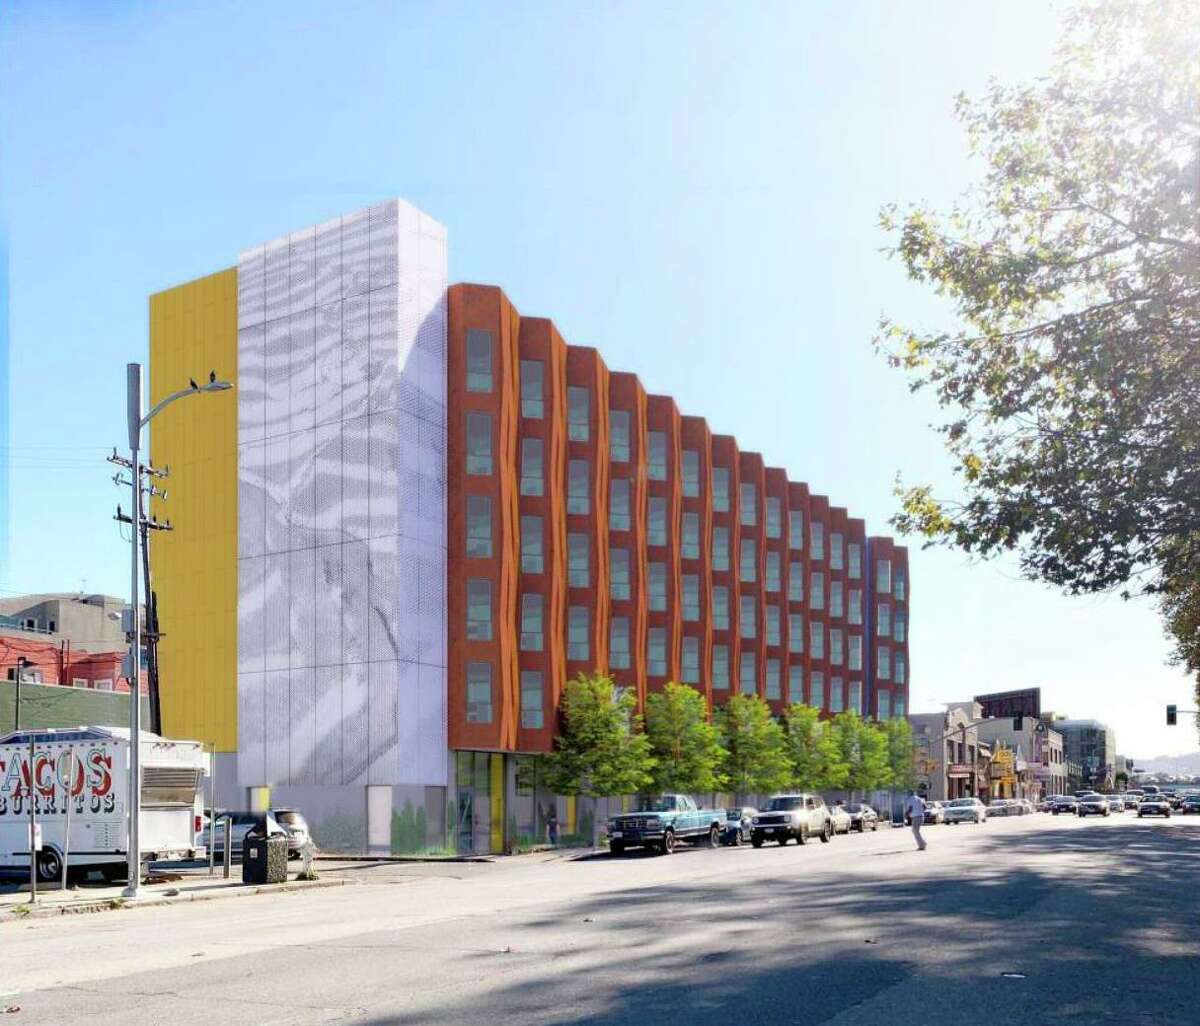 The 145-unit supportive housing complex for homeless people at 833 Bryant Street was built out of modular units.